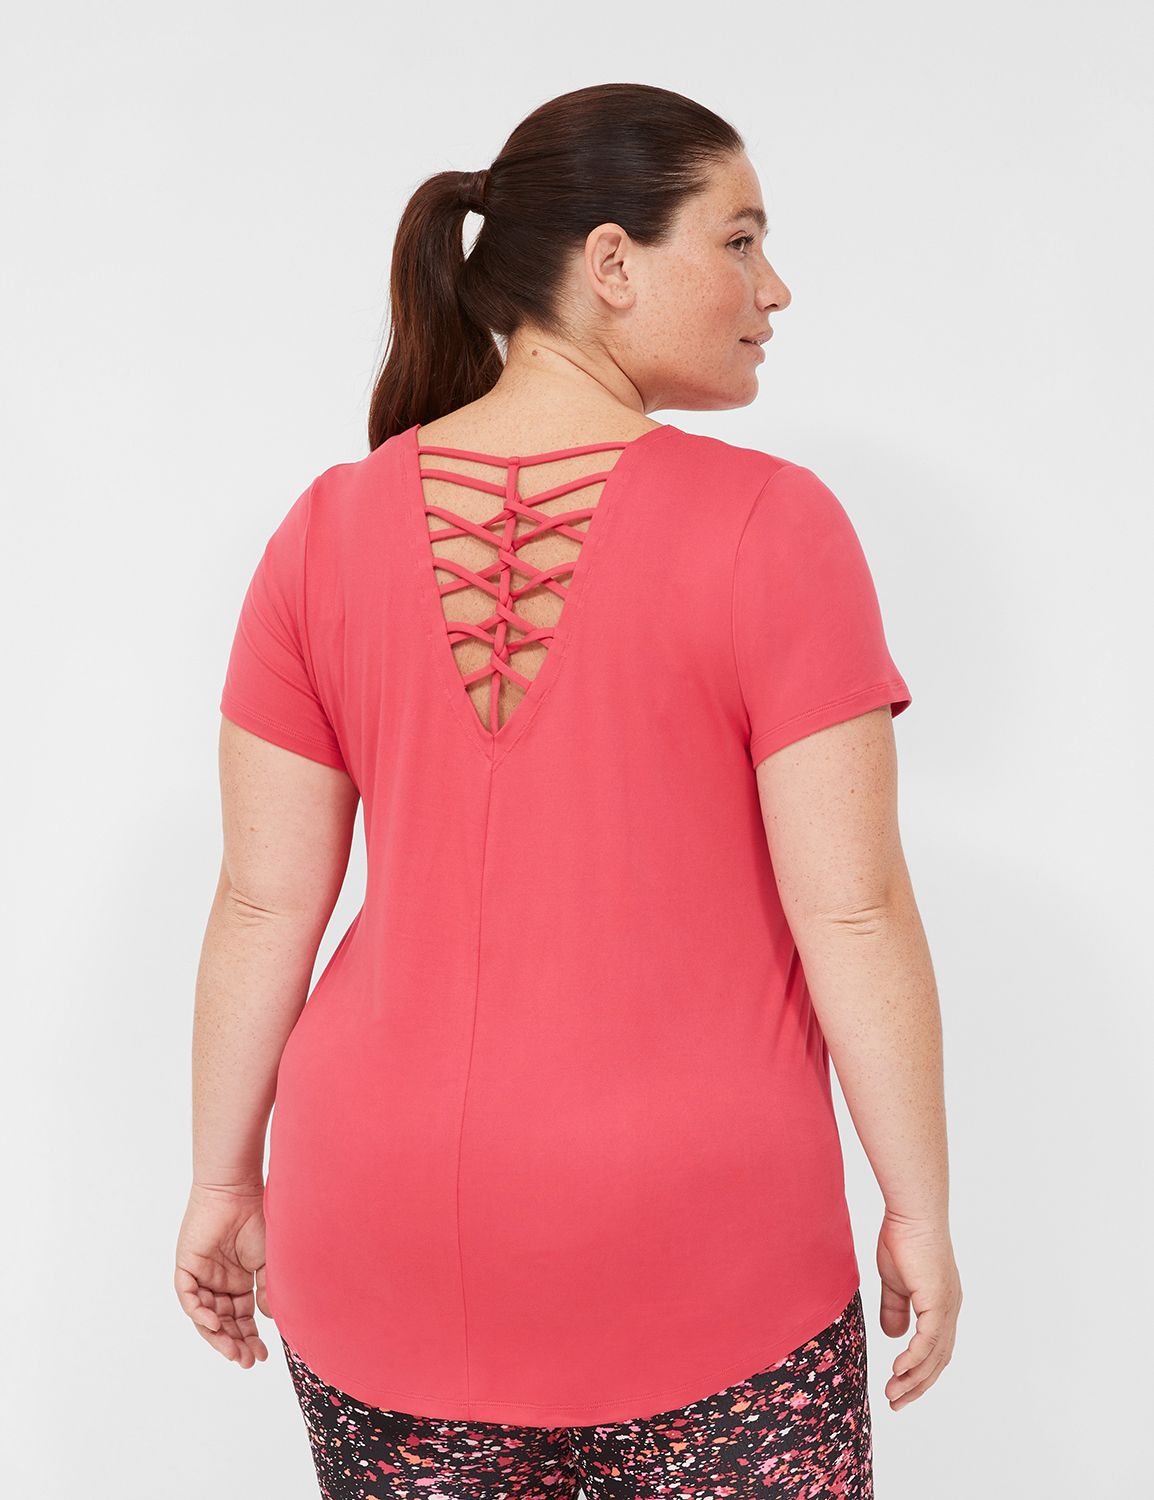  Plus Size Activewear For Women Long Sleeve, Sexy